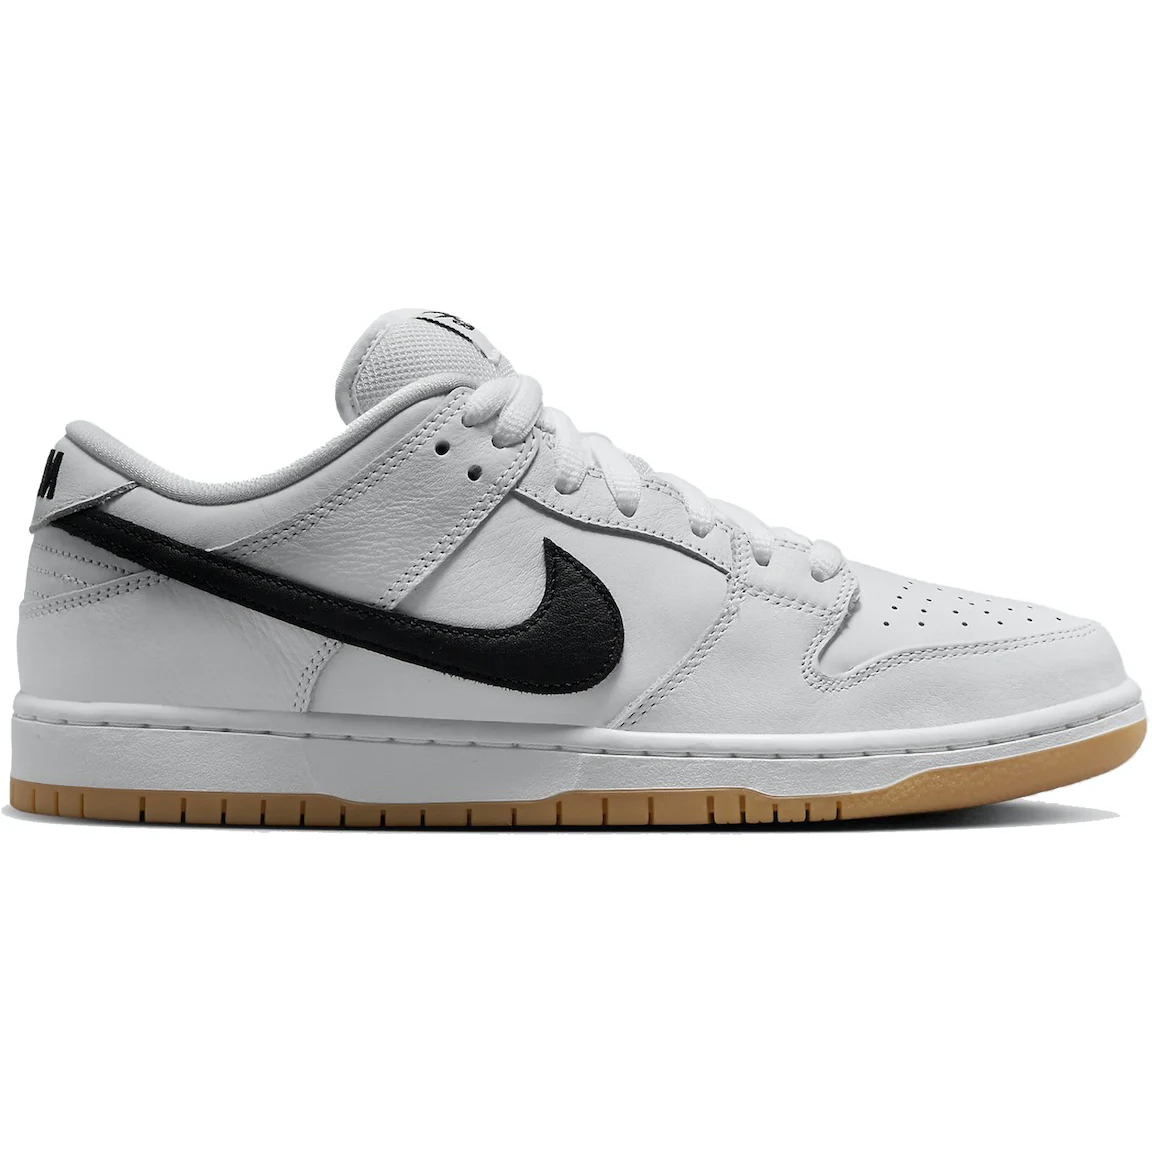 Nike SB Dunk Low White Gum from Nike